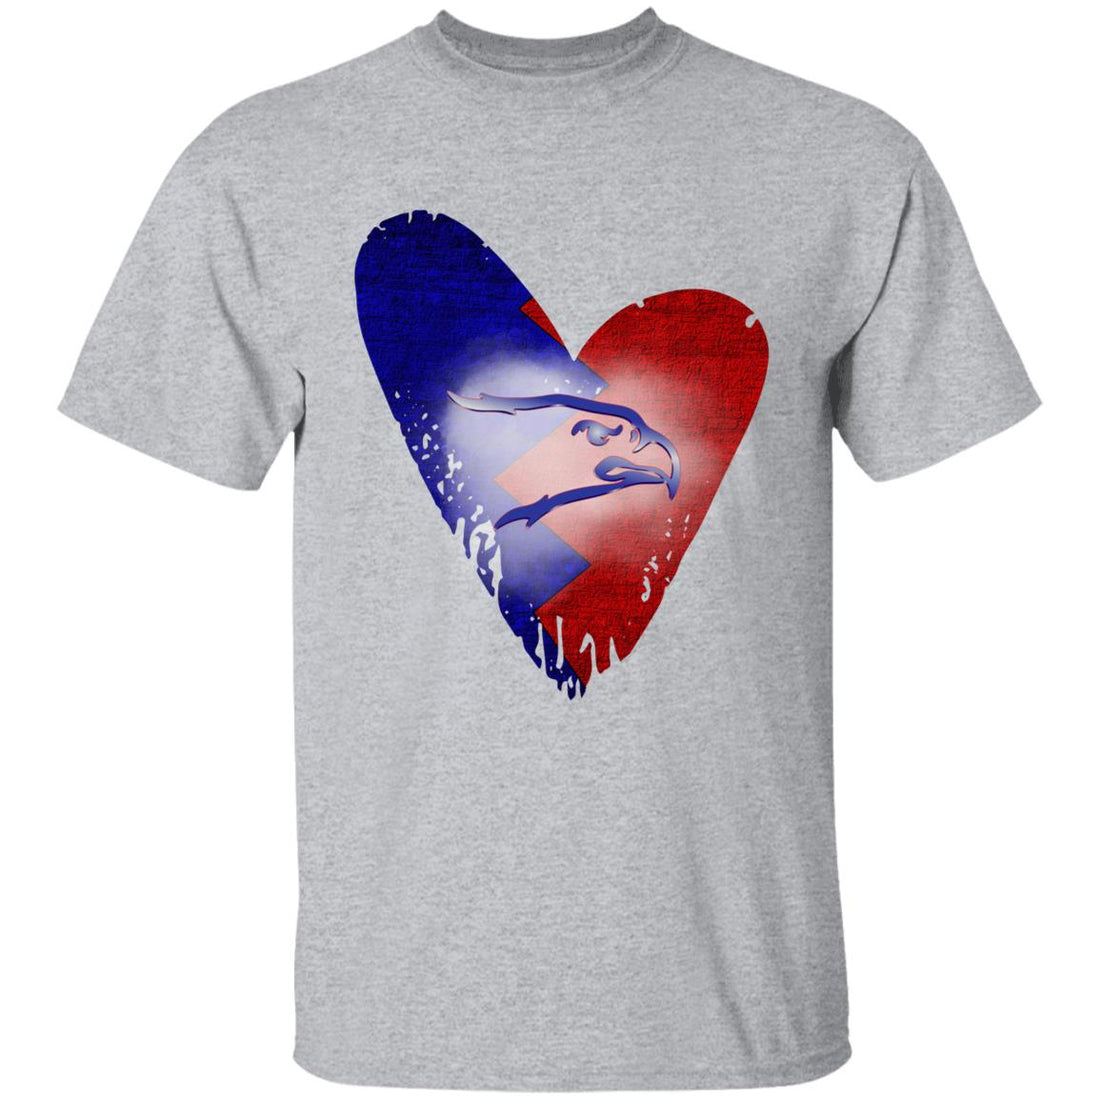 Eagle Love Youth T-Shirt - T-Shirts - Positively Sassy - Eagle Love Youth T-Shirt